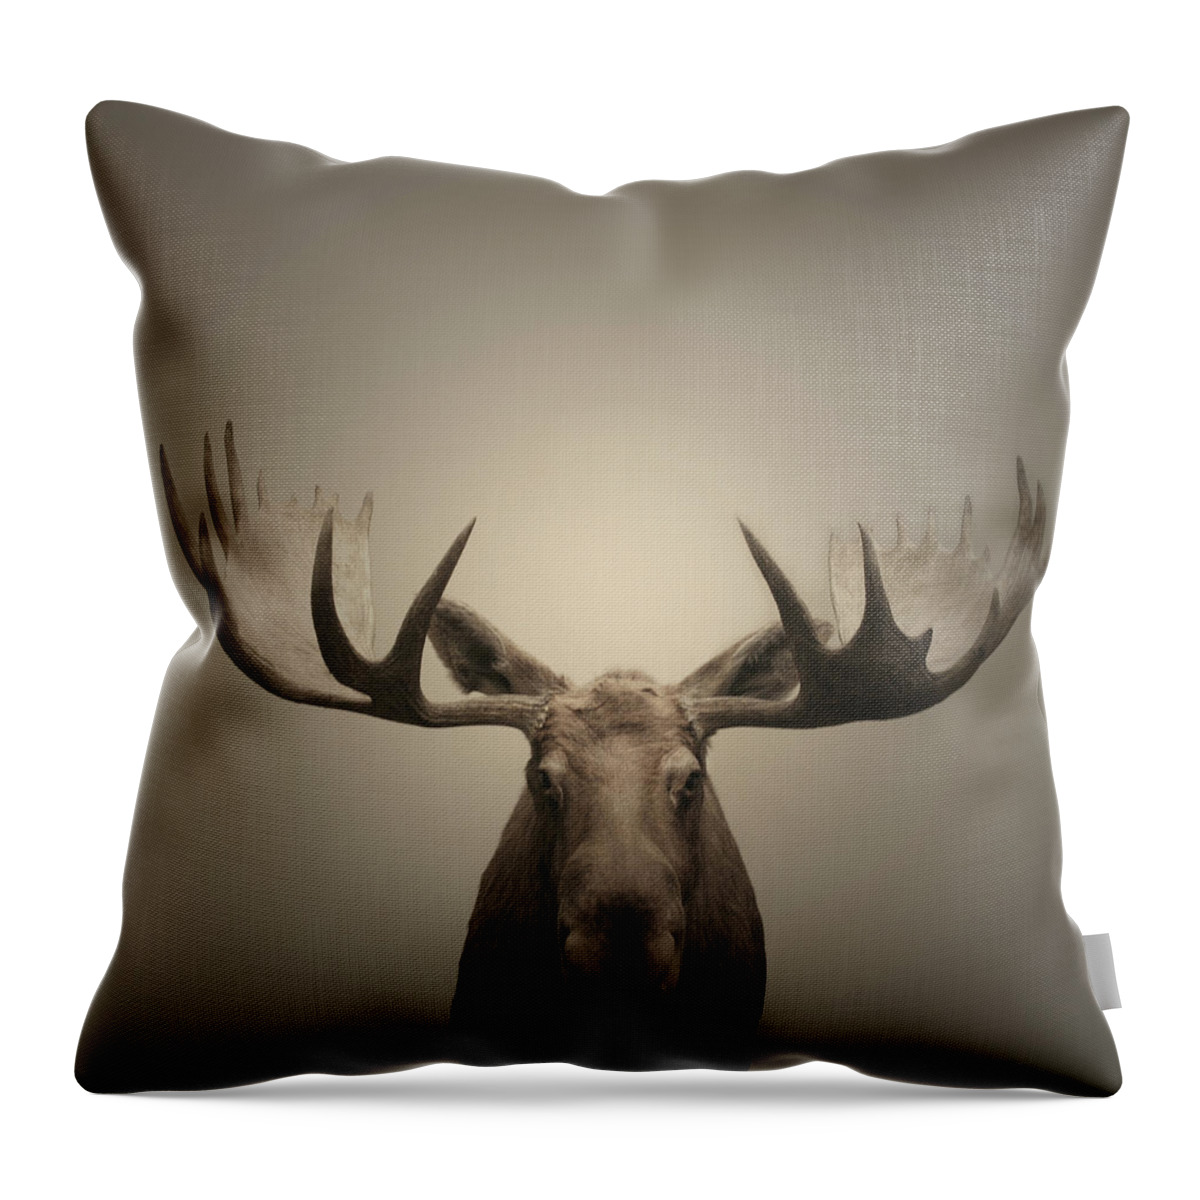 The End Throw Pillow featuring the photograph Trophee by Jeff Roques